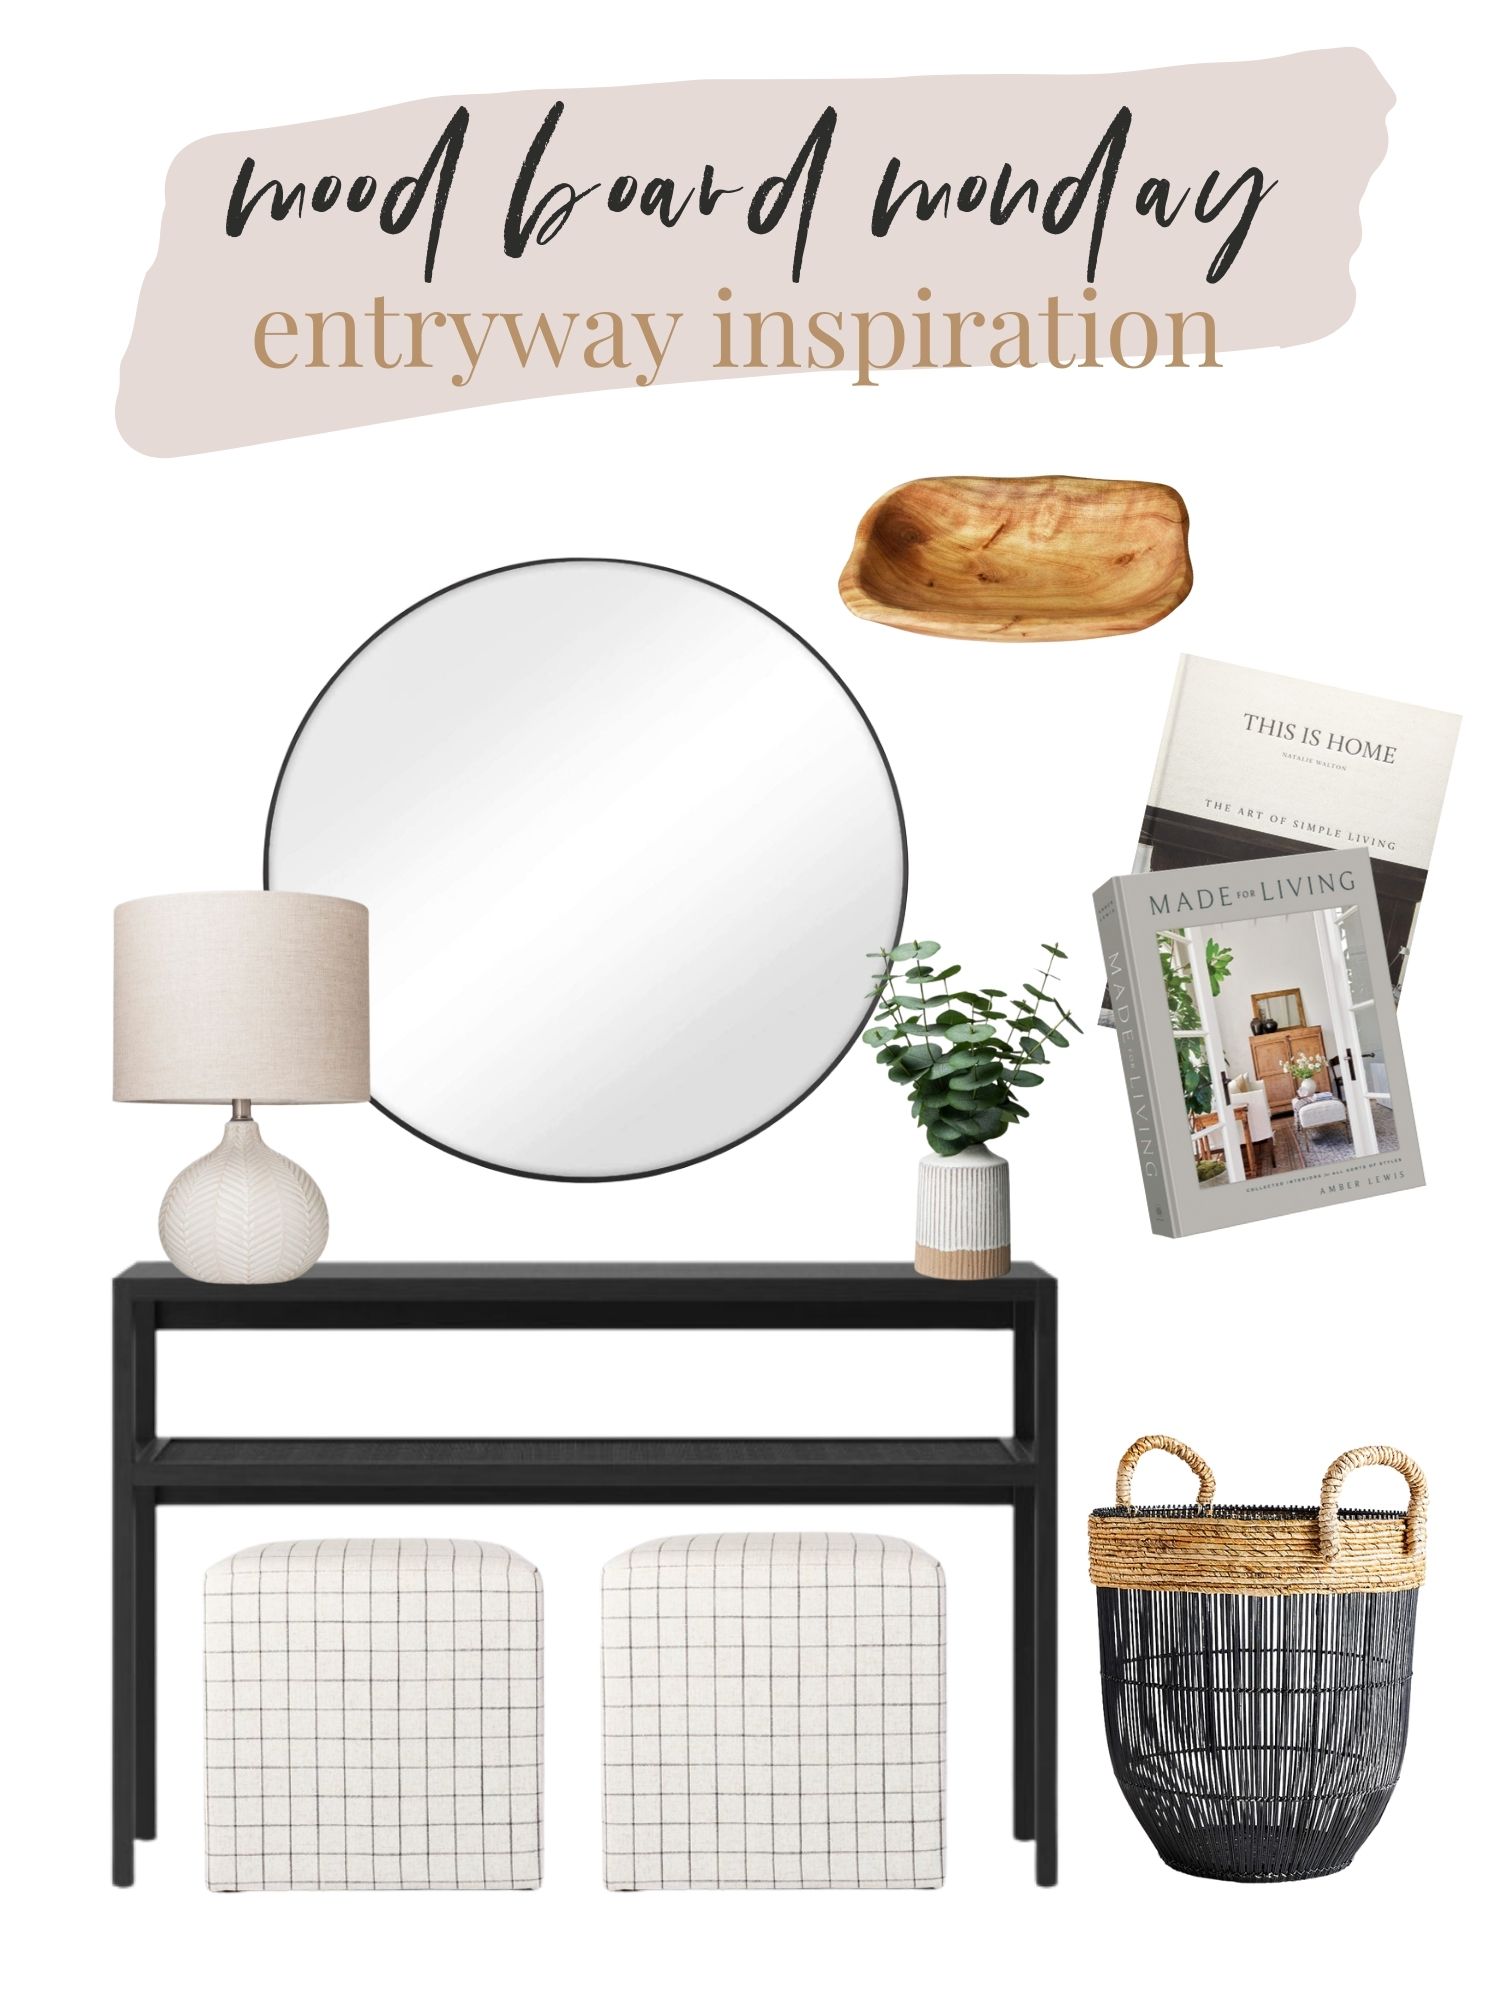 Growing Haines | Mood Board Monday - Entryway Inspiration